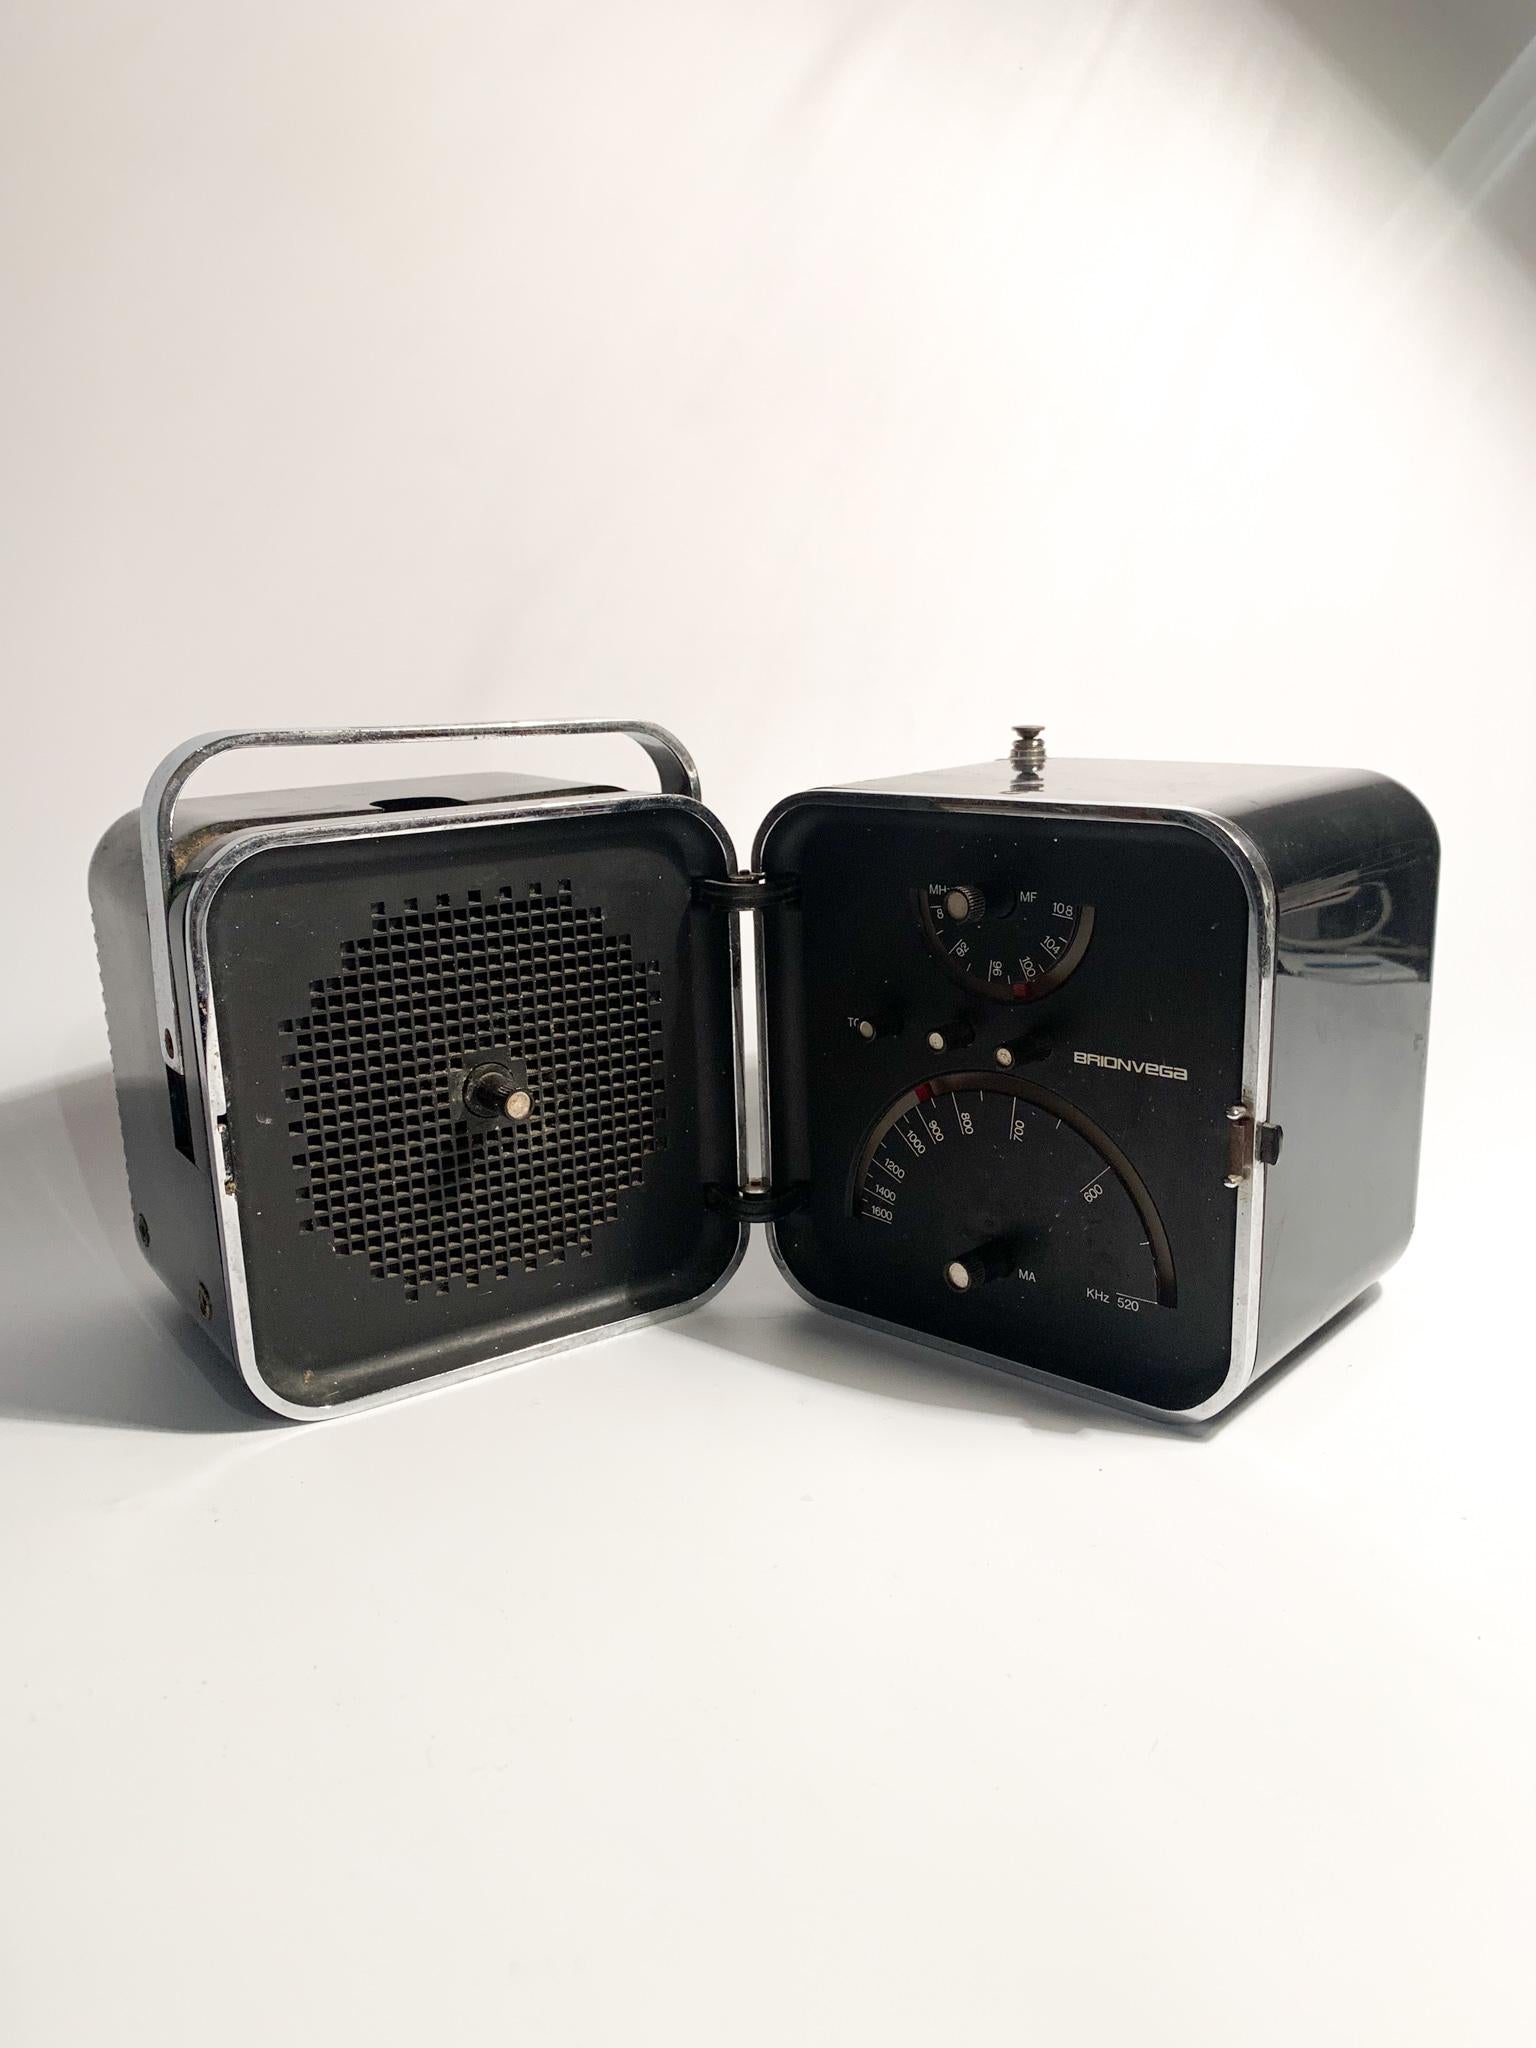 Radio Cubo Brionvega TS502 Black with knobs, made by Richard Sapper and Marco Zanuso

The radio is functional, both with batteries and with electric cable.